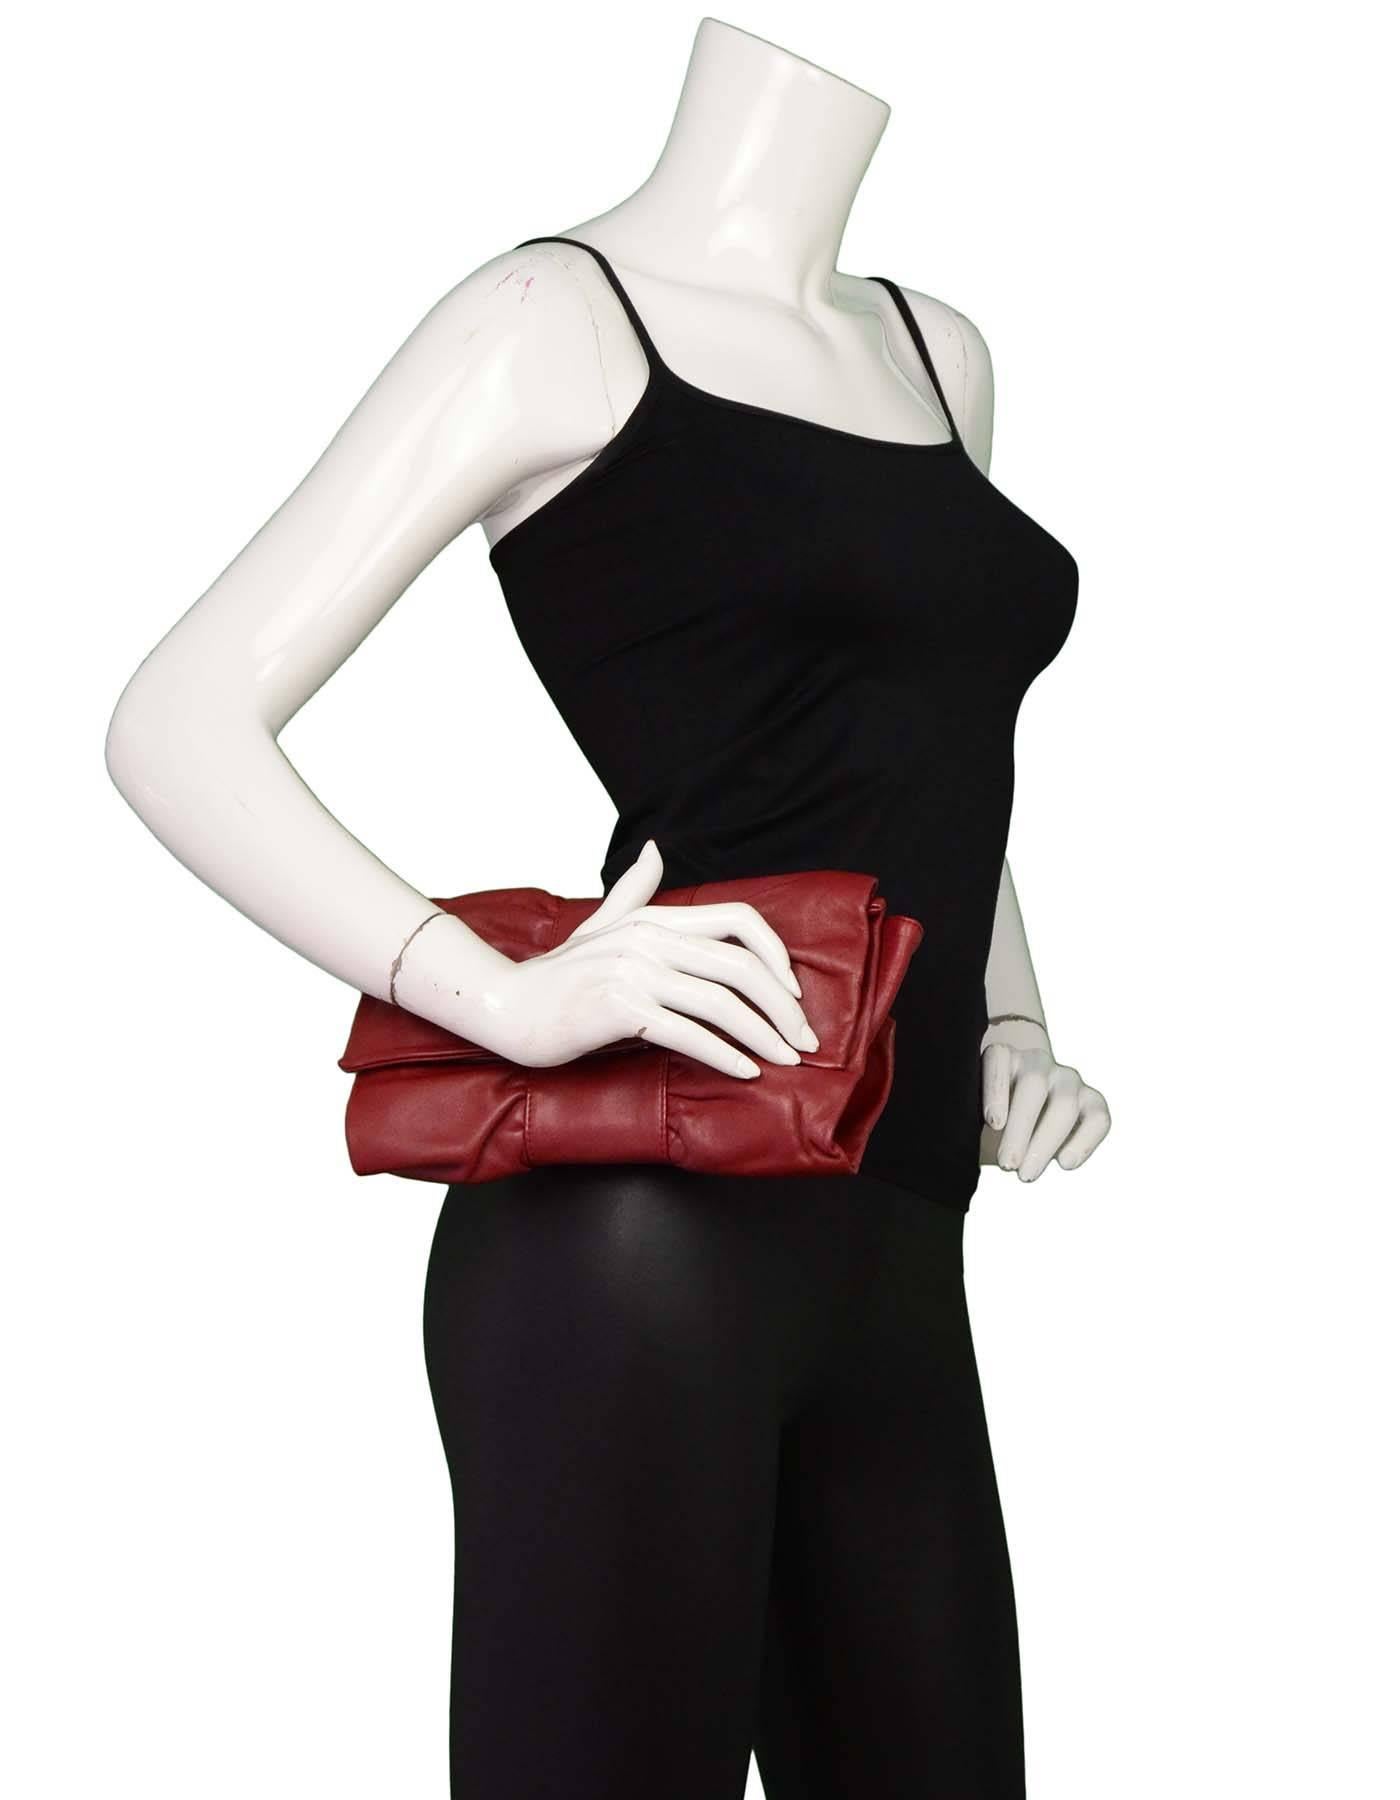 Furla Burgundy Leather Bow Clutch

Made In: Italy
Color: Burgundy
Hardware: None
Materials: Leather
Lining: Black and white polka dot textile
Closure/Opening: Flap top with magnetic closure
Exterior Pockets: None
Interior Pockets: One wall